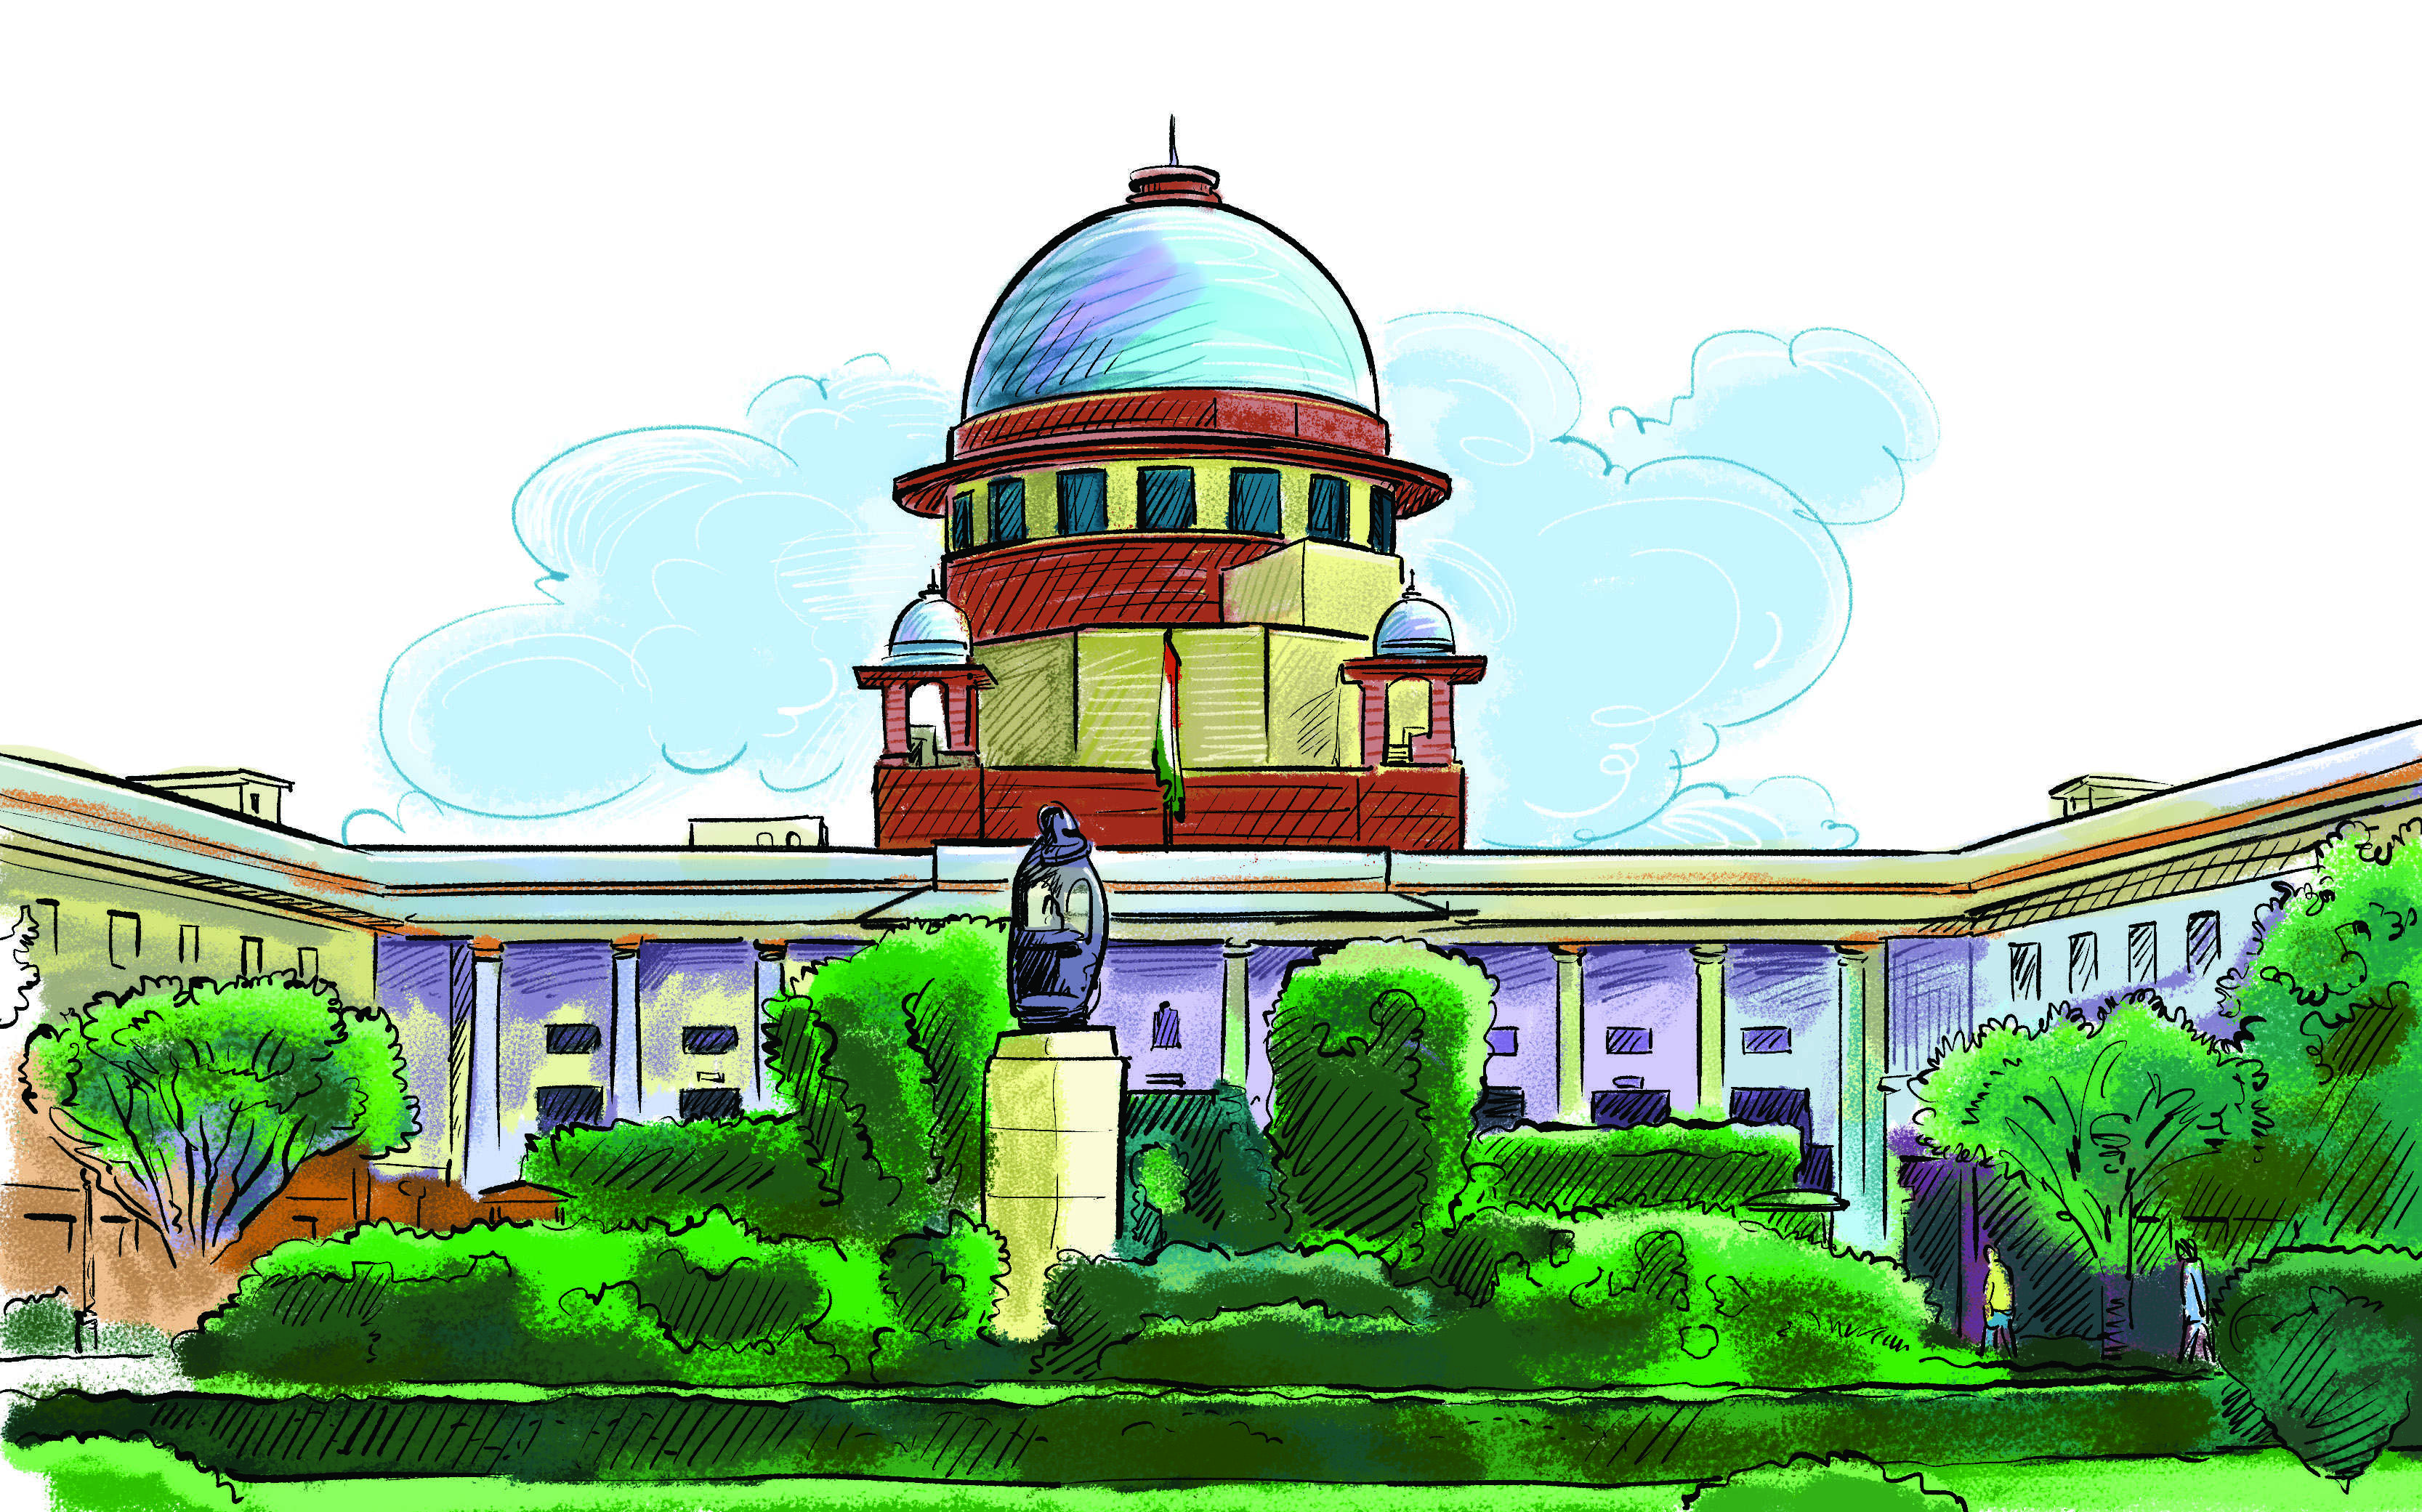 Top10: What the Supreme Court said on telecom AGR dues